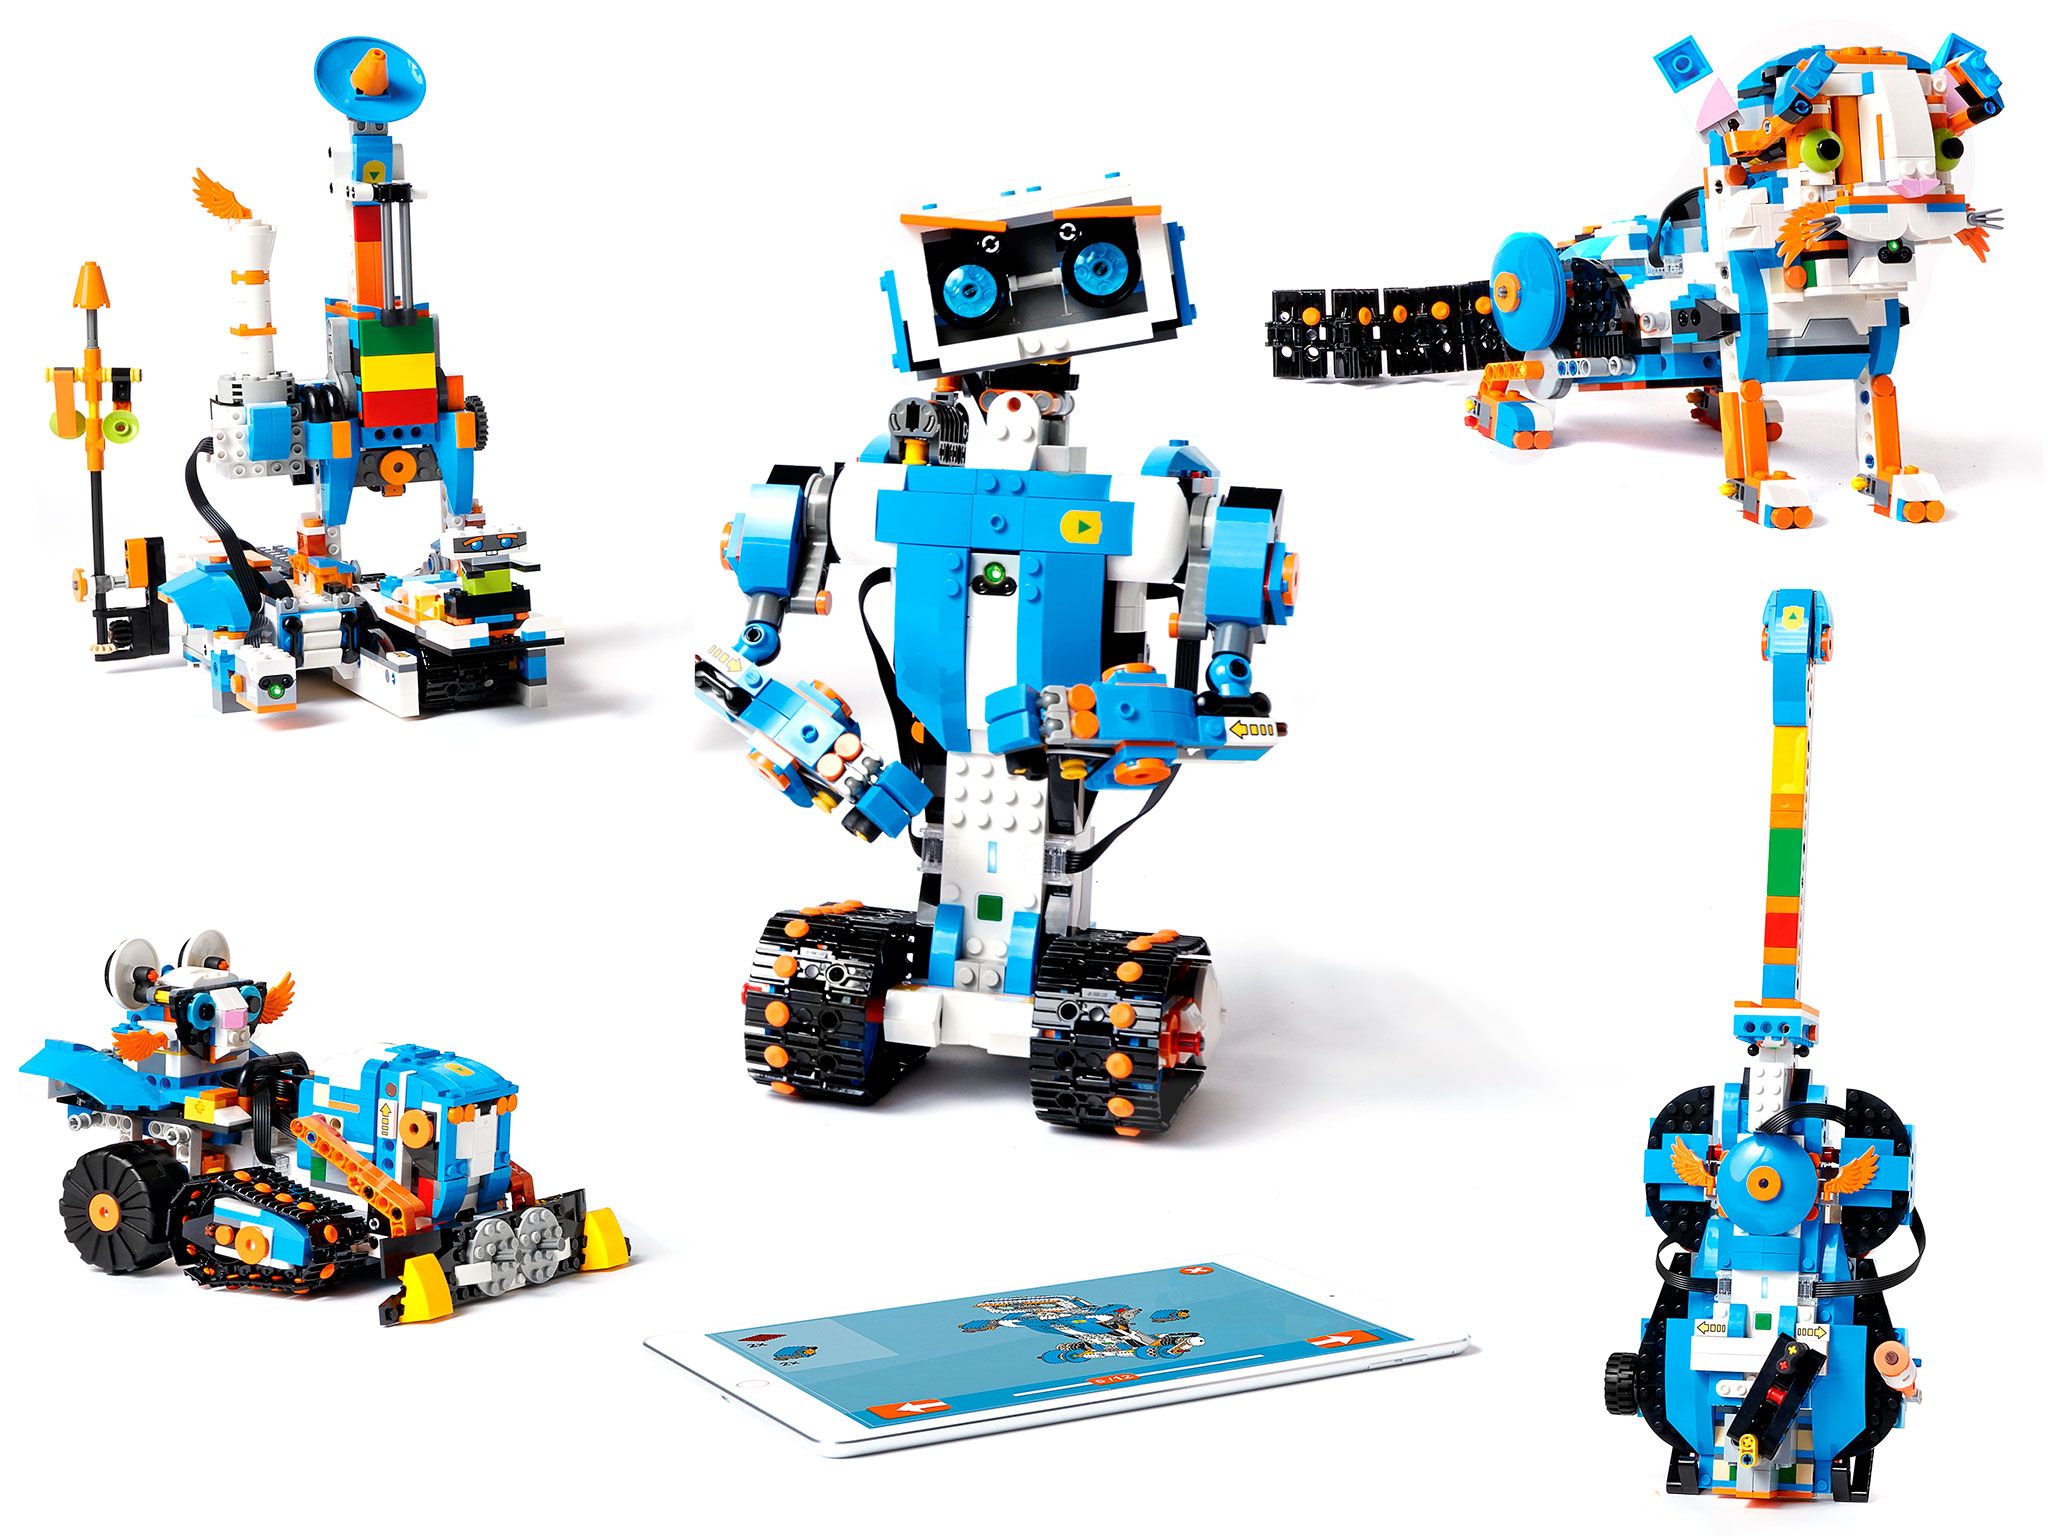 Lego Boost - ROBOTS: Guide to the World Robotics